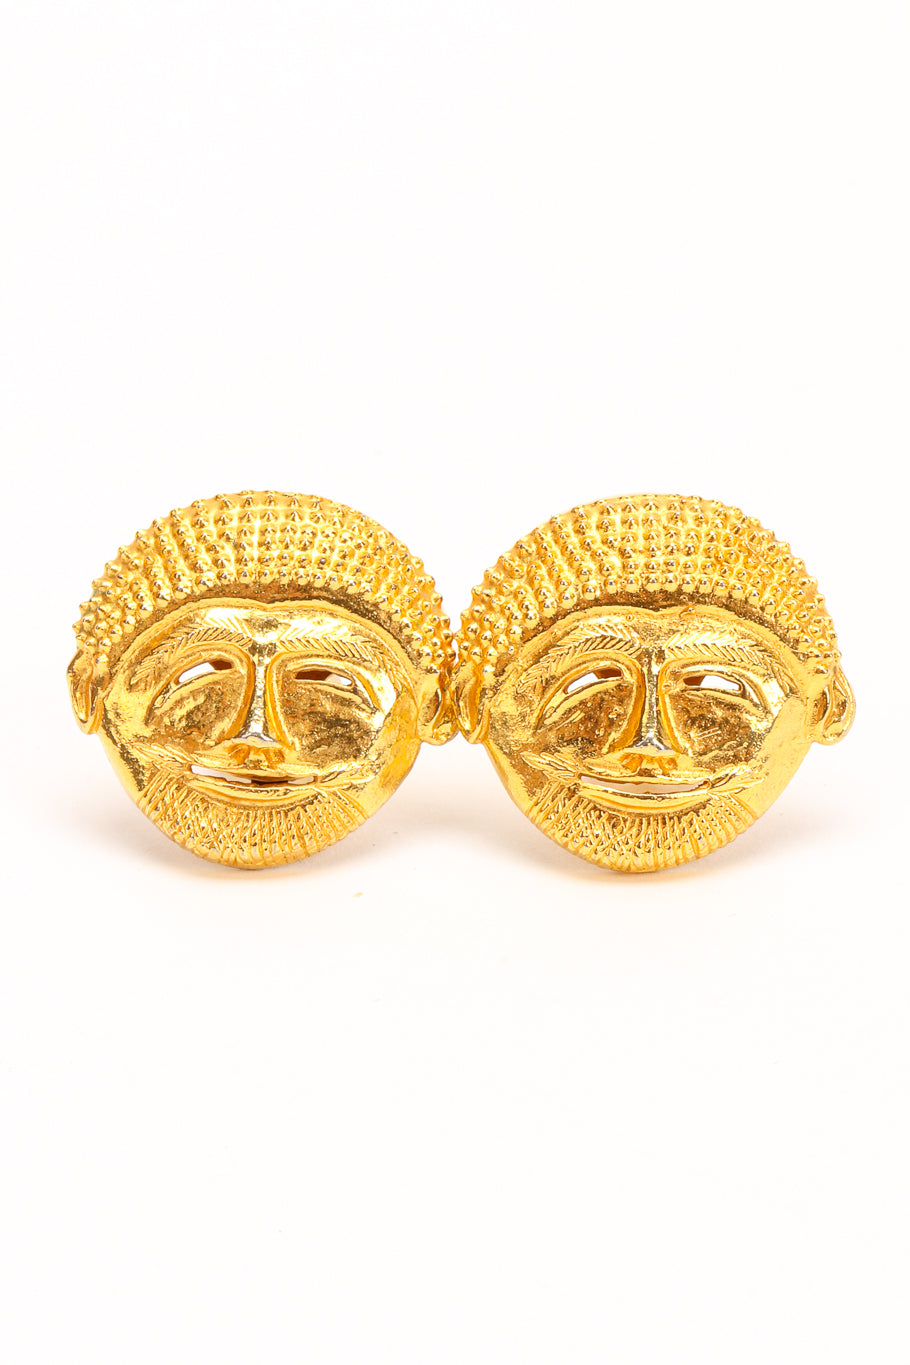 Mask earrings by Isabel Canovas on white background side by side @recessla